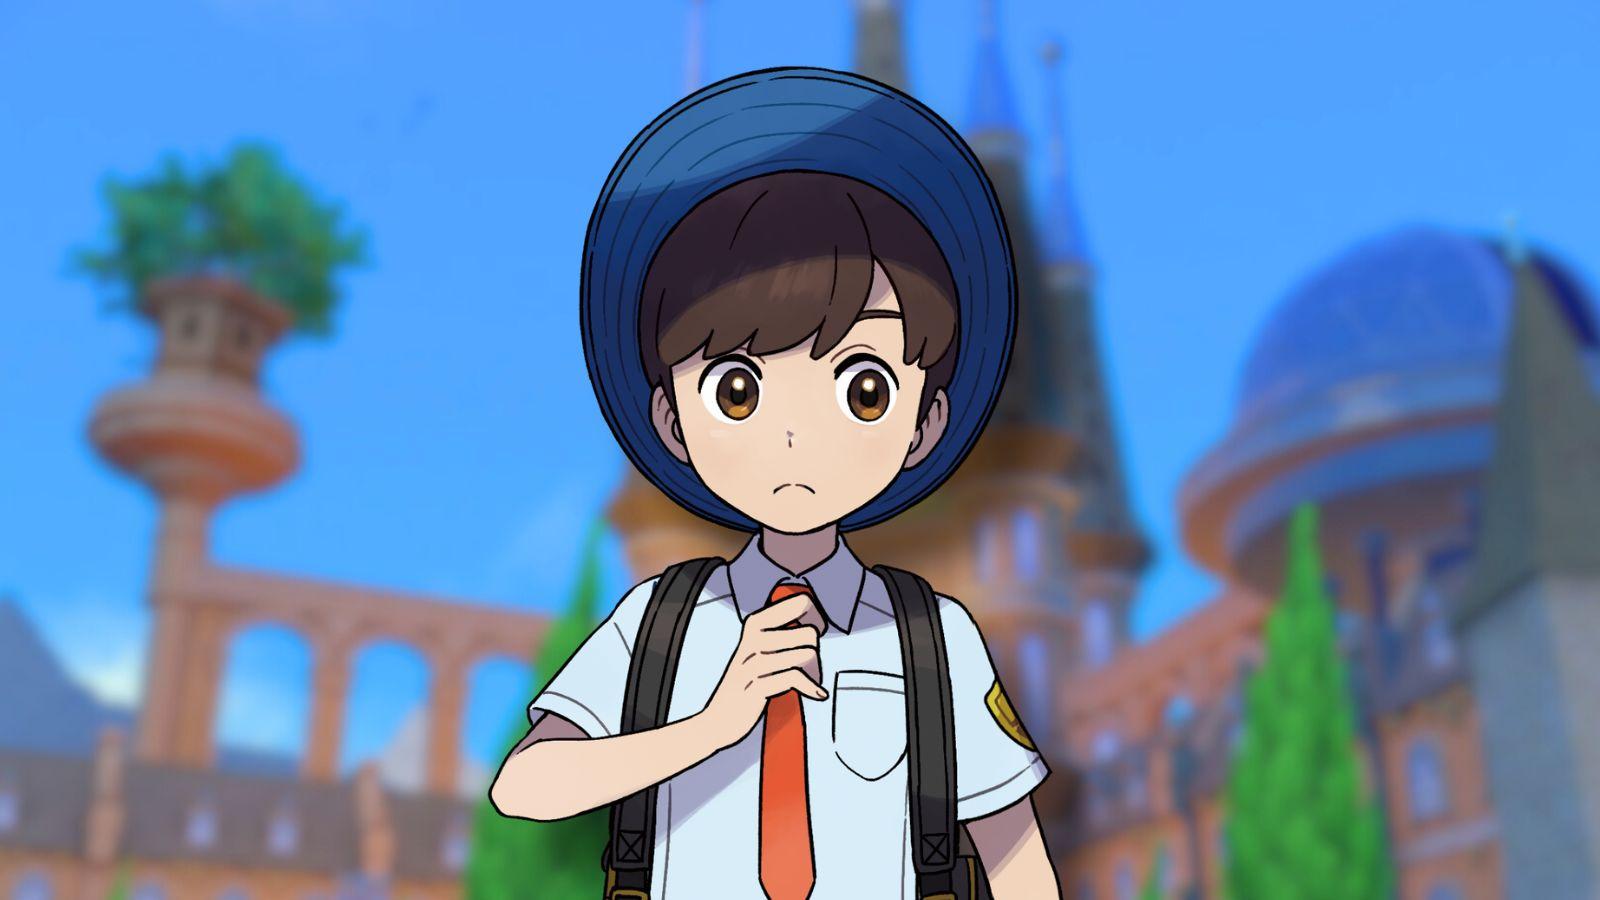 Pokemon Scarlet & Violet player character with academy in the background.